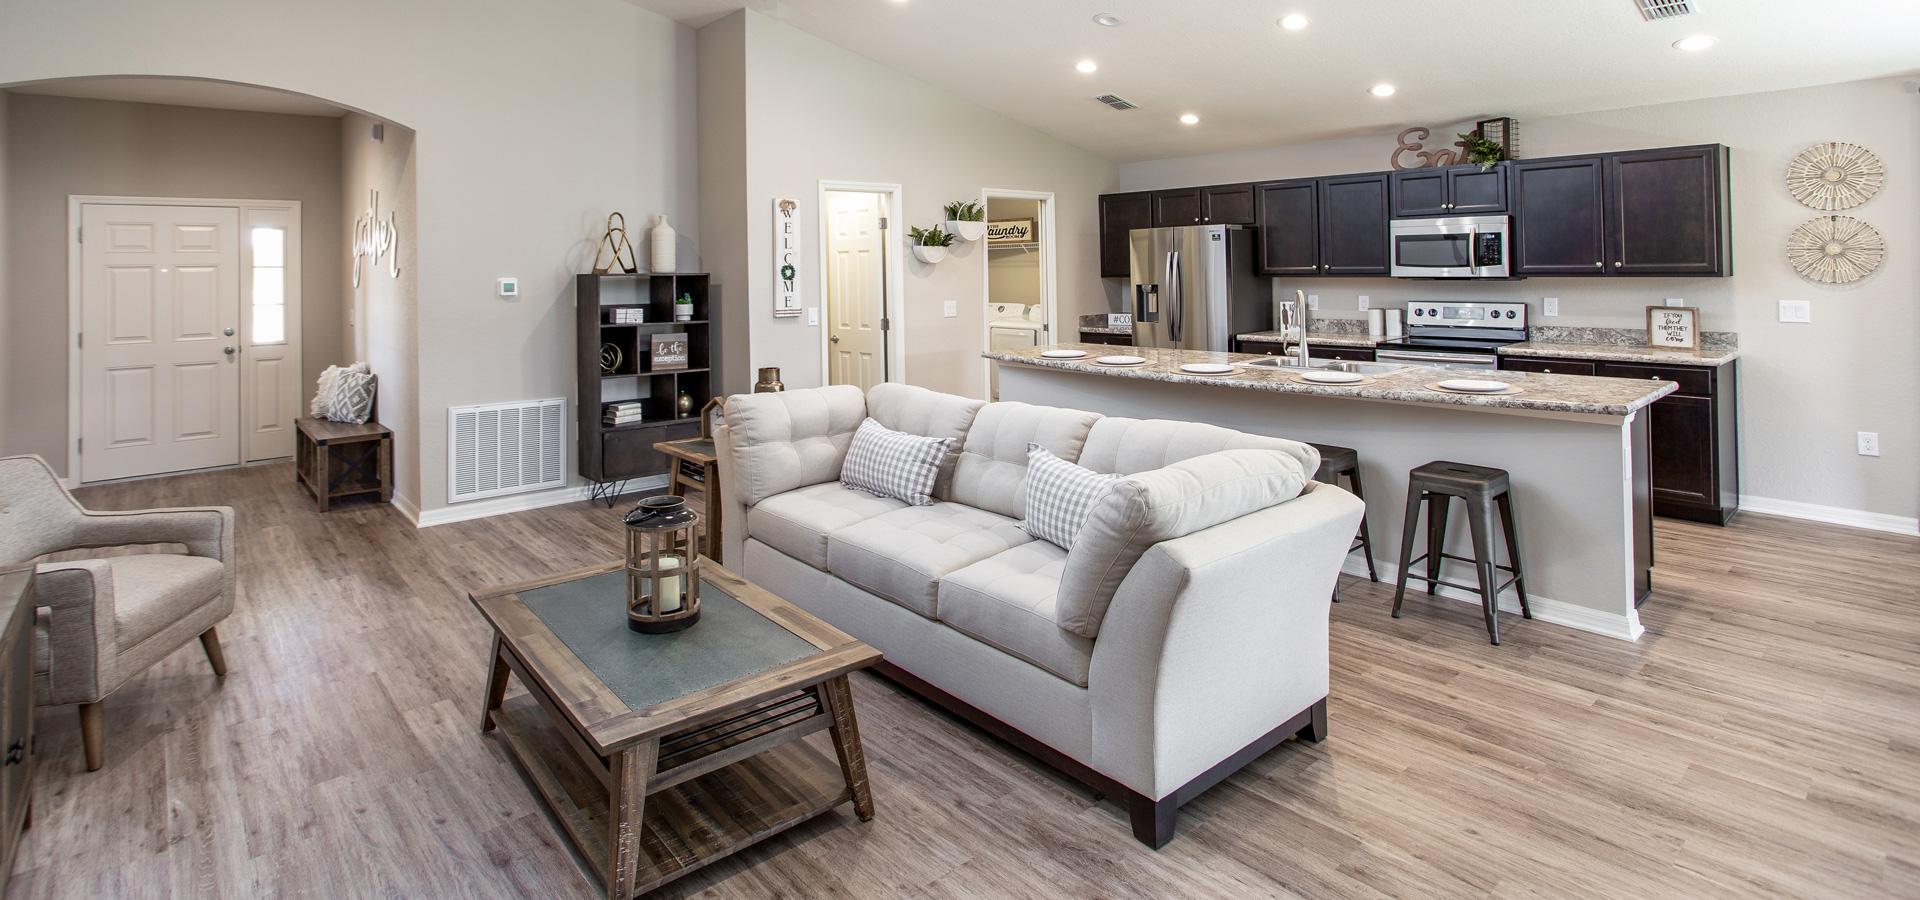 Welcoming and open living area in the Raychel, a new home plan by Highland Homes